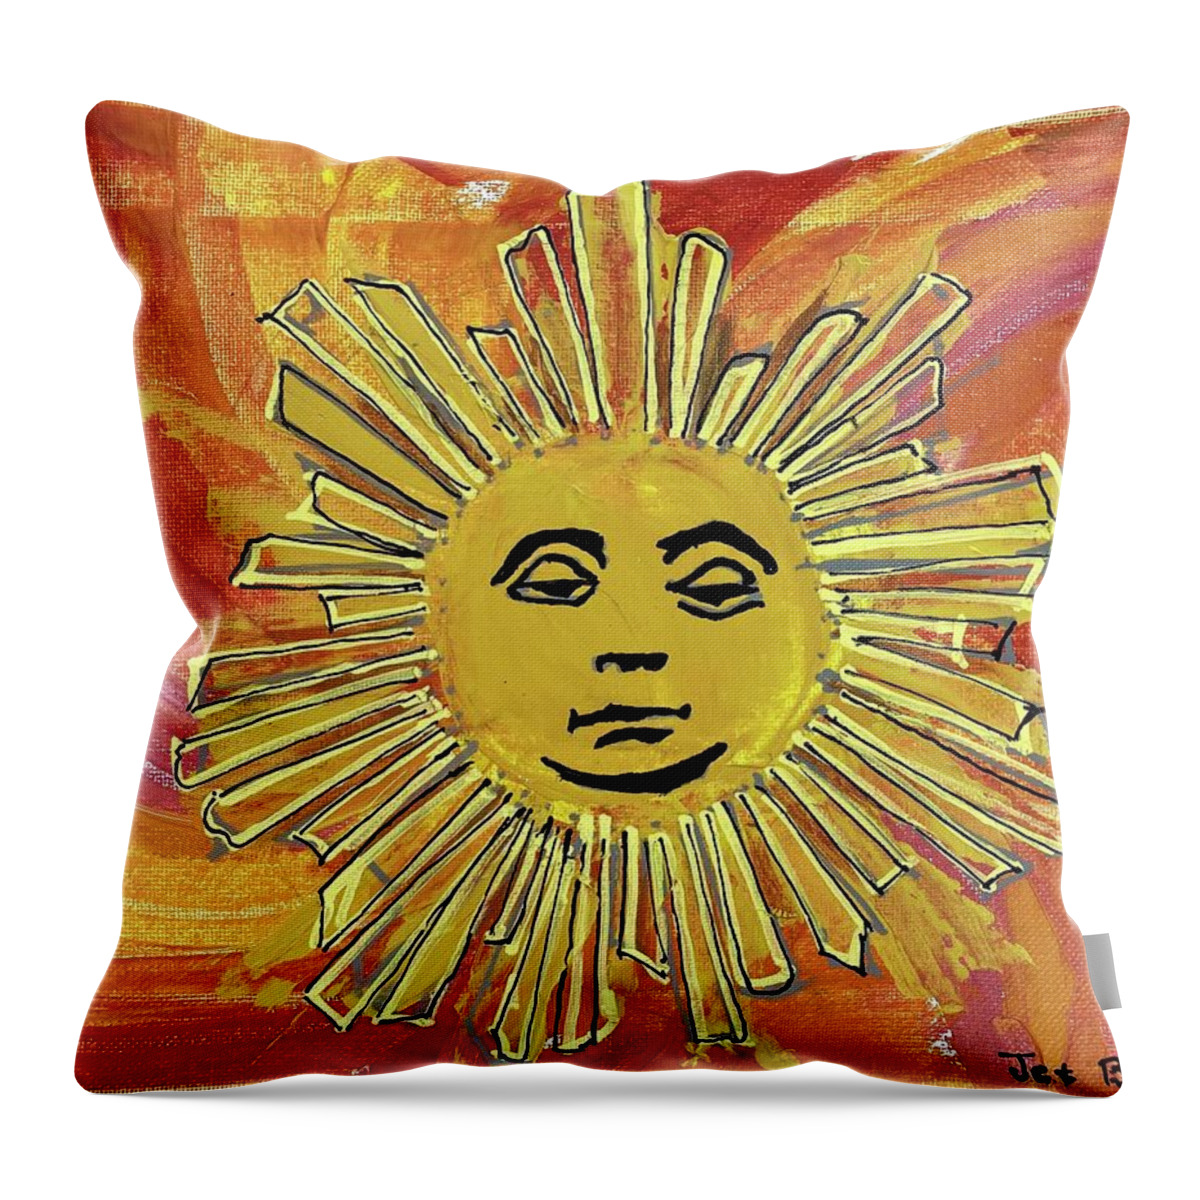 Cbs Sunday Morning Throw Pillow featuring the painting The Sun Rises Every Day by Jet Baker